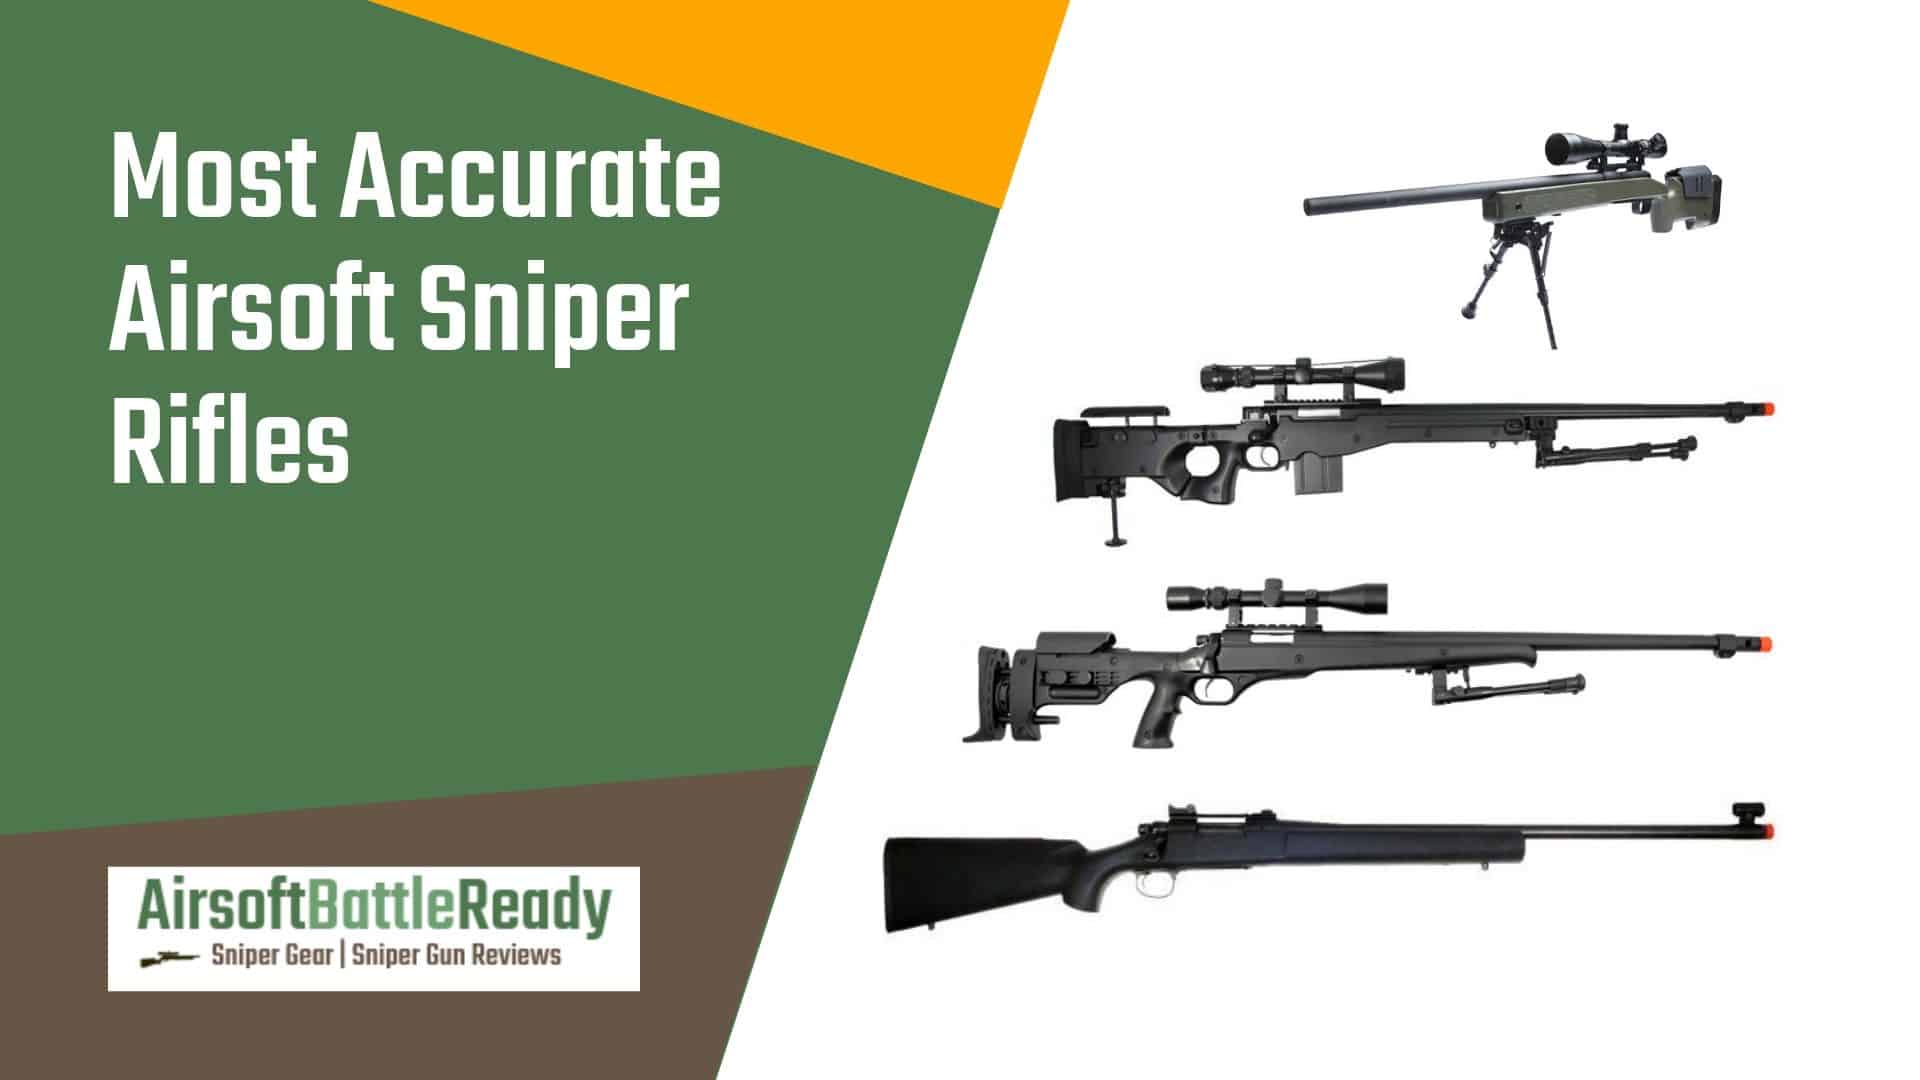 Most Accurate Airsoft Sniper Rifles - Airsoft Battle Ready